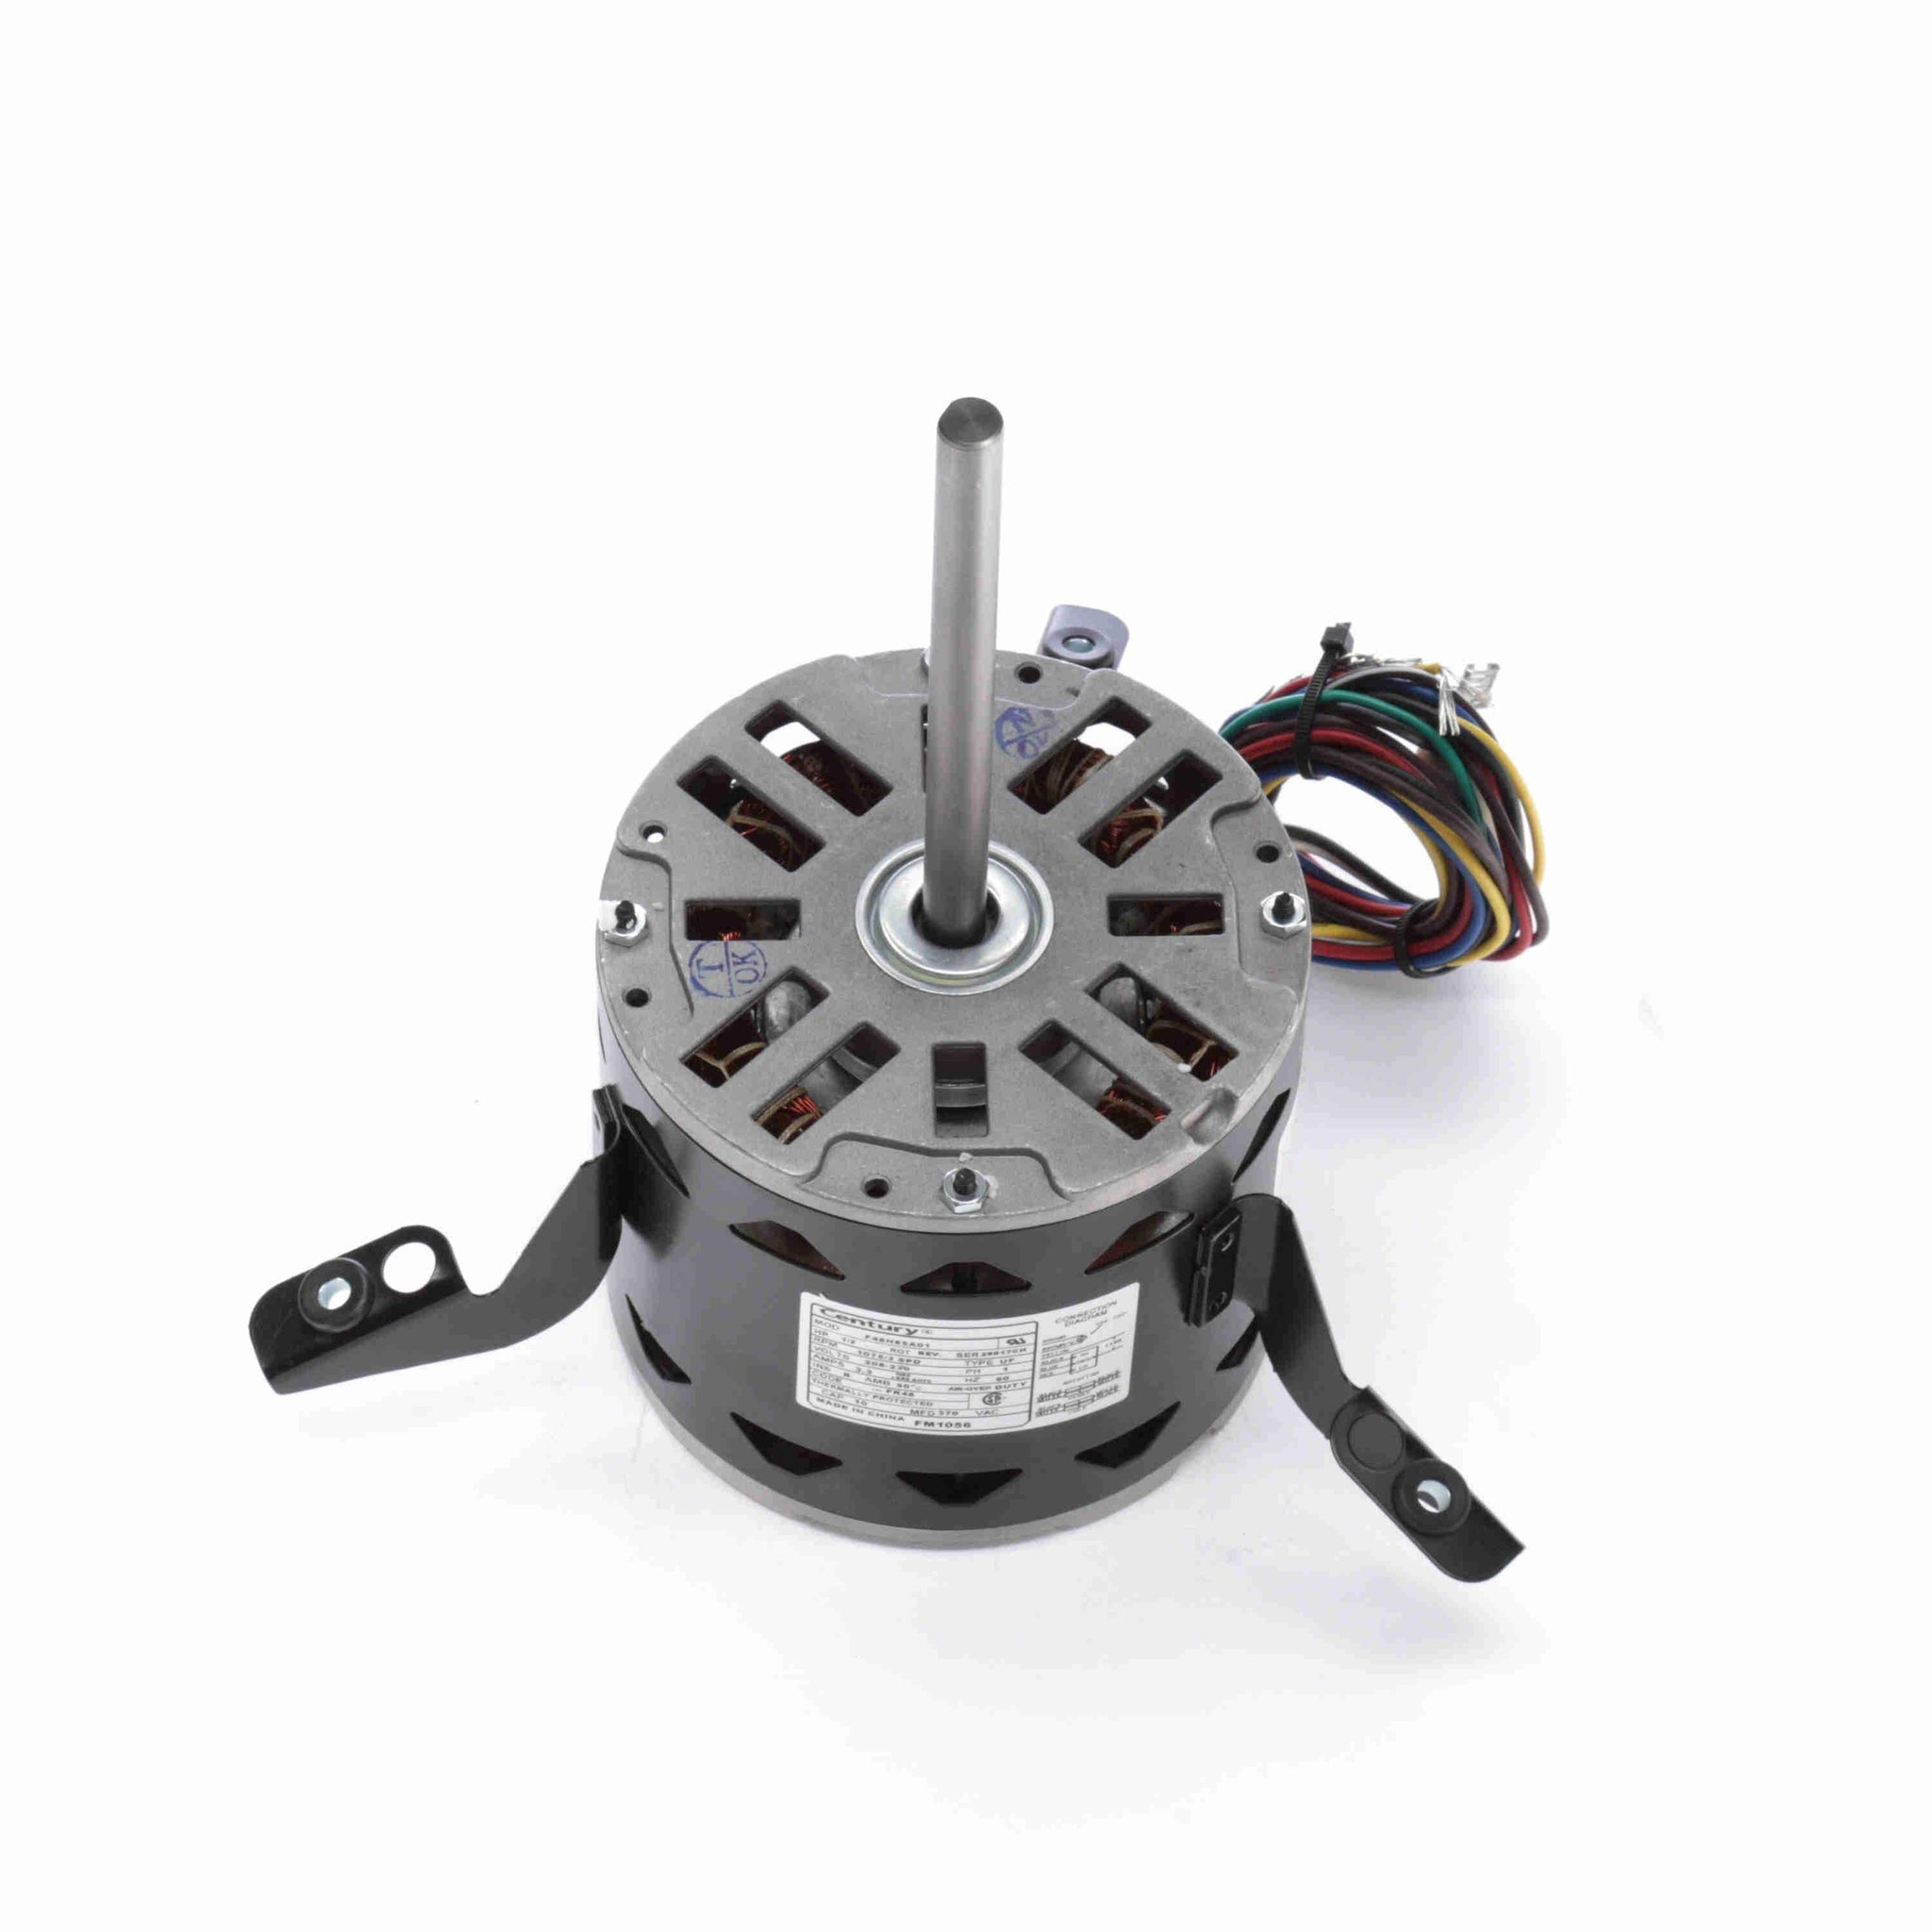 FM1056 - 1/2 HP Fan Coil / Room Air Conditioner Motor, 1075 RPM, 3 Speed, 208-230 Volts, 48 Frame, OAO - Hardware & Moreee